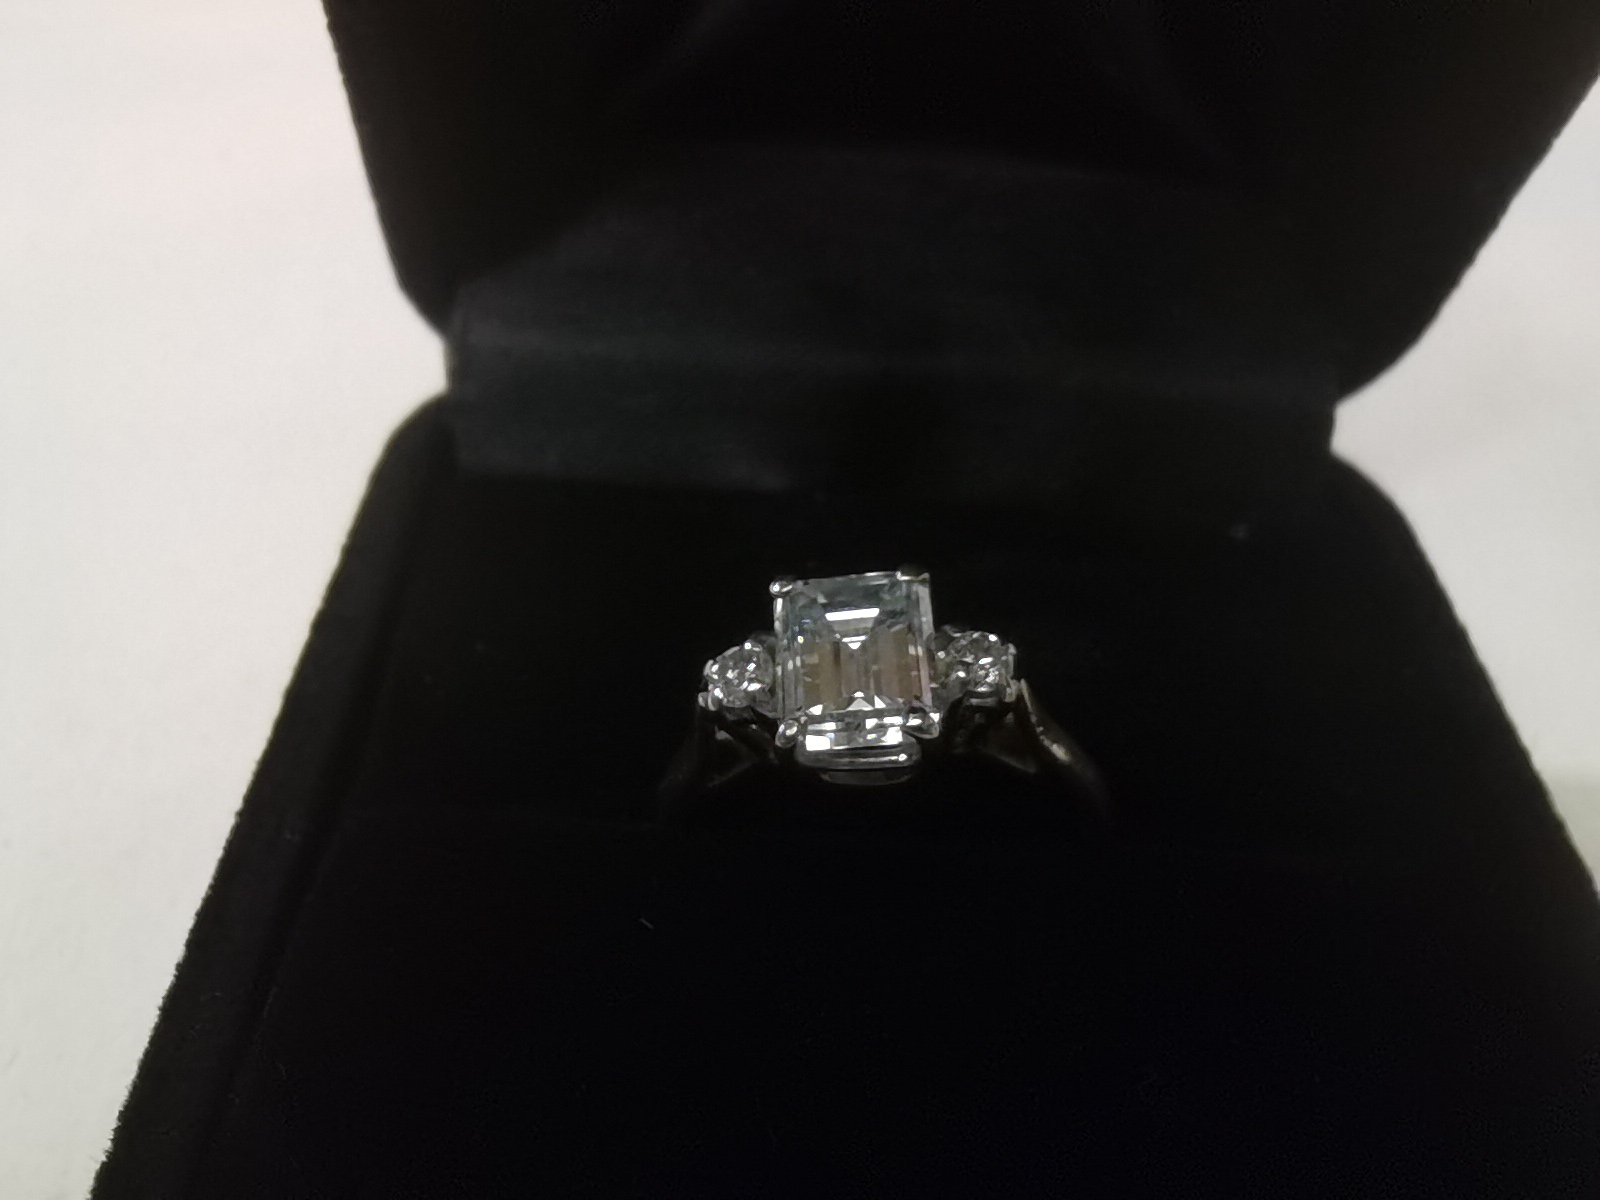 Diamond Ring - Emerald Cut 1.03 with 10 points either side in 18carat yellow gold size J - Image 8 of 9